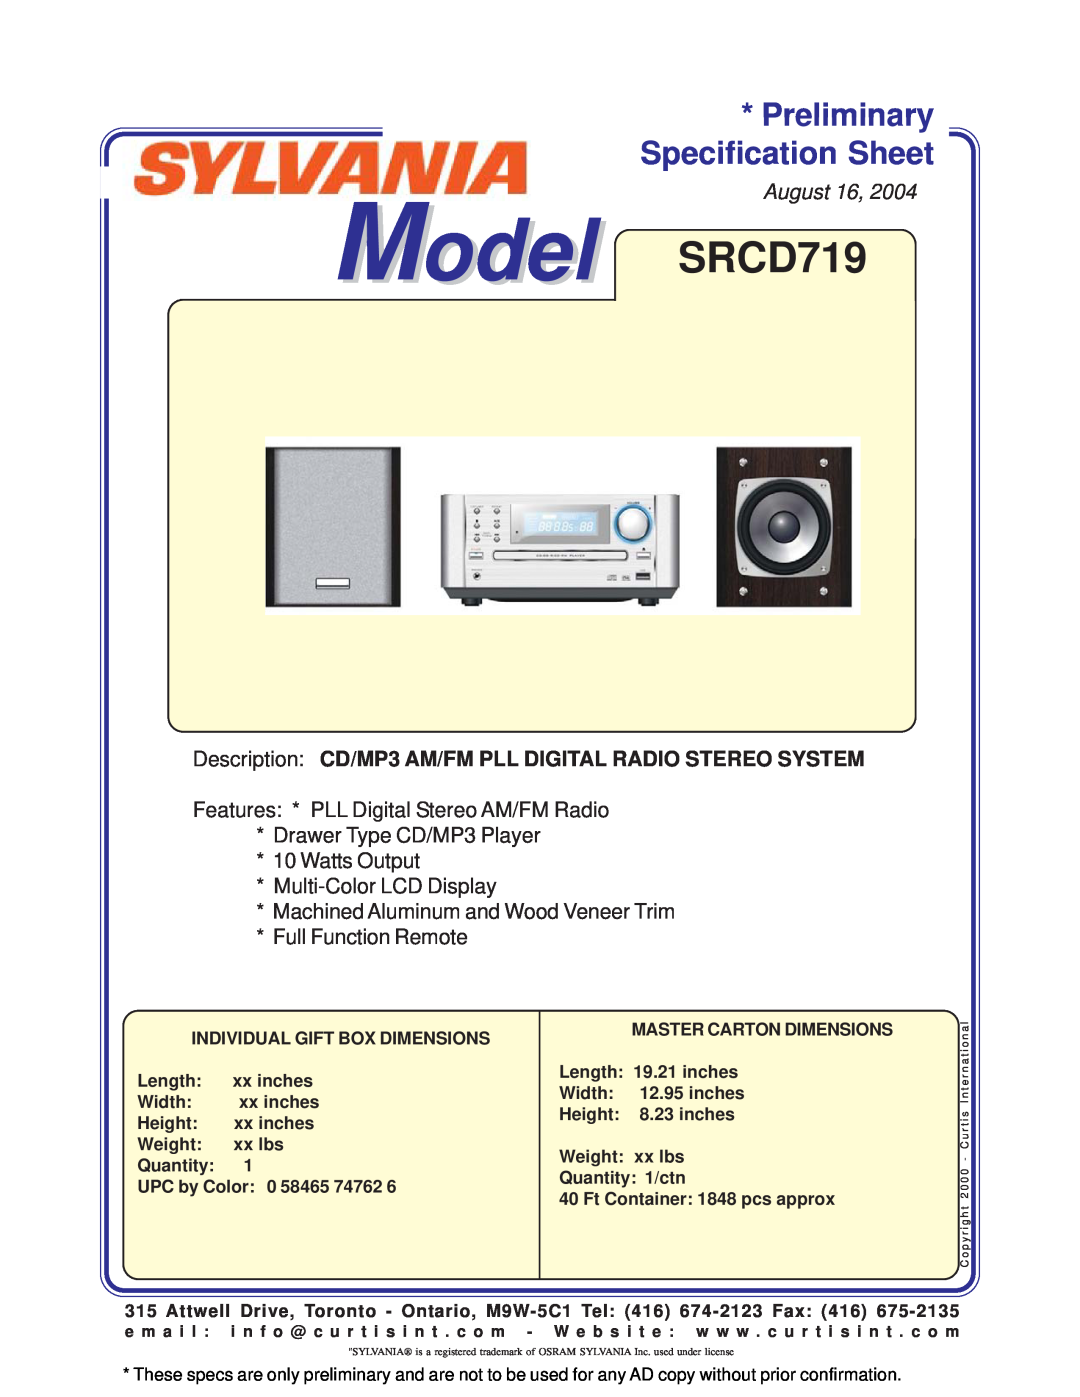 Curtis specifications Model SRCD719, Preliminary Specification Sheet, August, Features * PLL Digital Stereo AM/FM Radio 